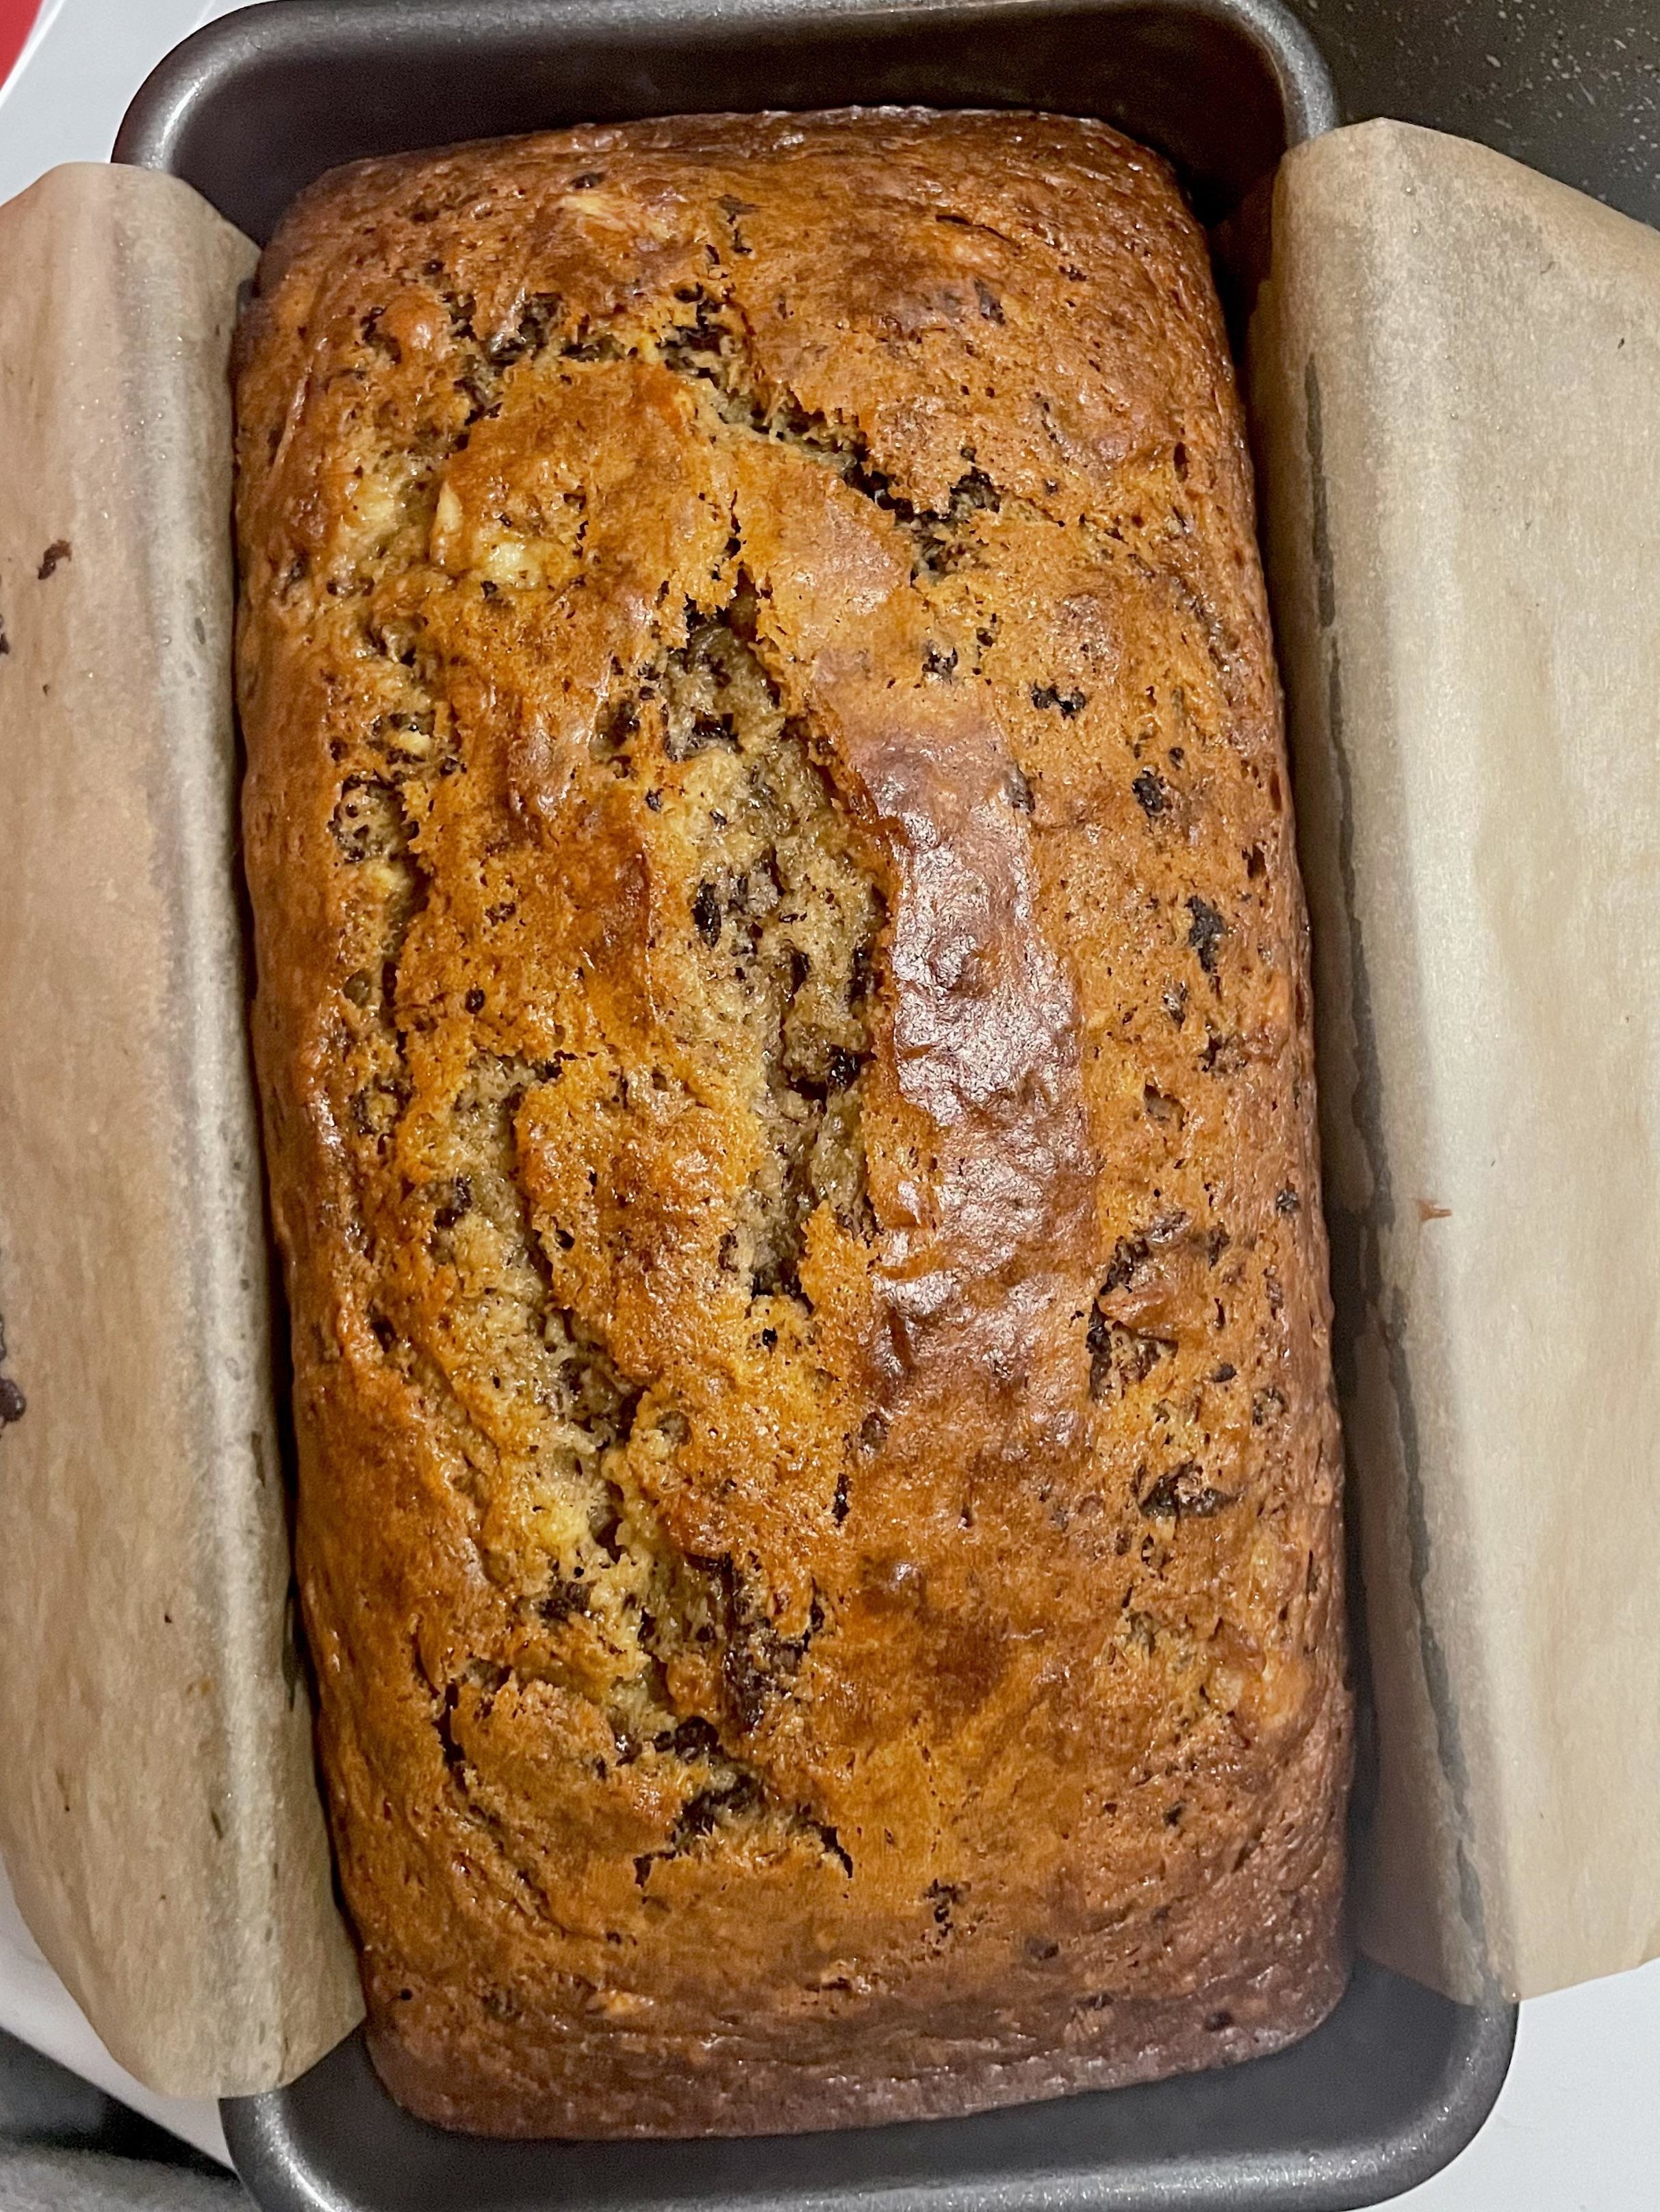 Freshly baked loaf of banana bread with nuts in a baking pan